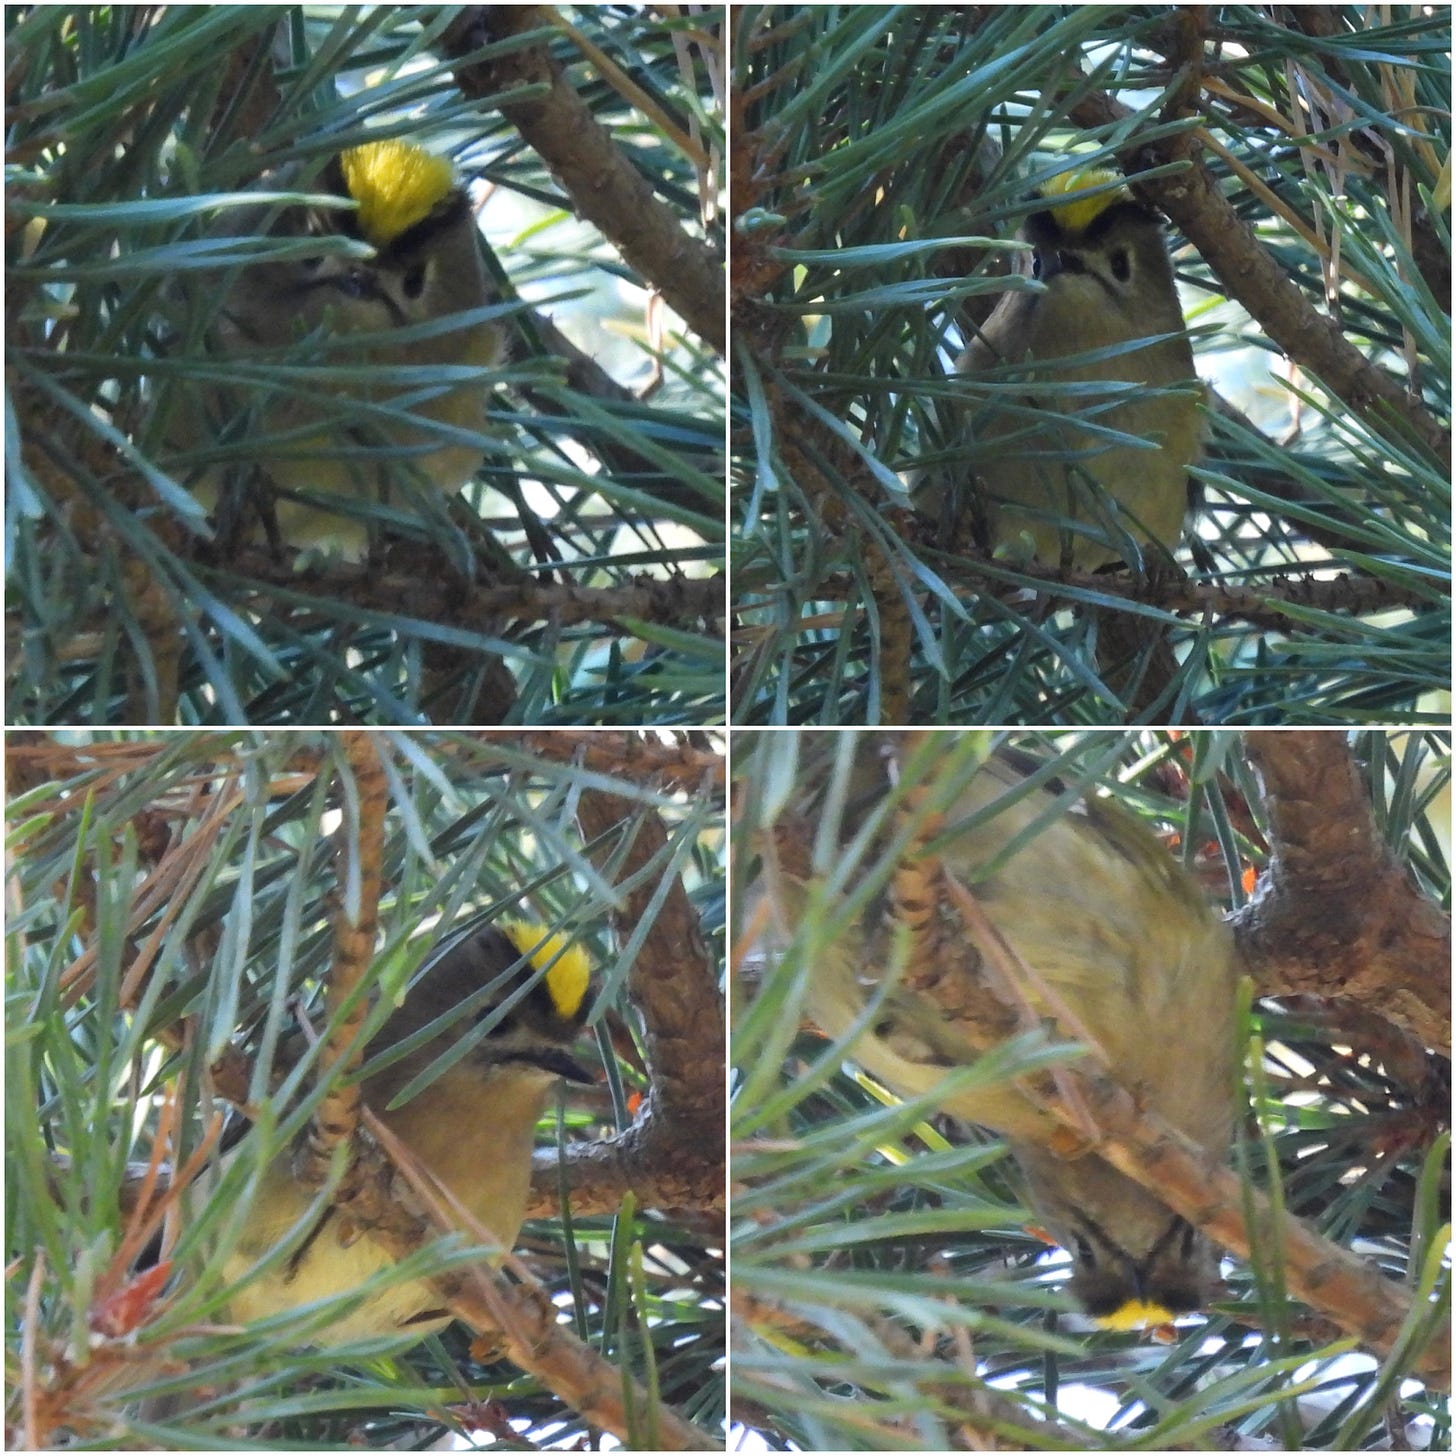 A collage of 4 photos each showing  Goldcrest displaying its yellow crest. In all cases the birds are partially hidden by pine needles and branches. In the bottom right photo the Goldcrest is upside down!